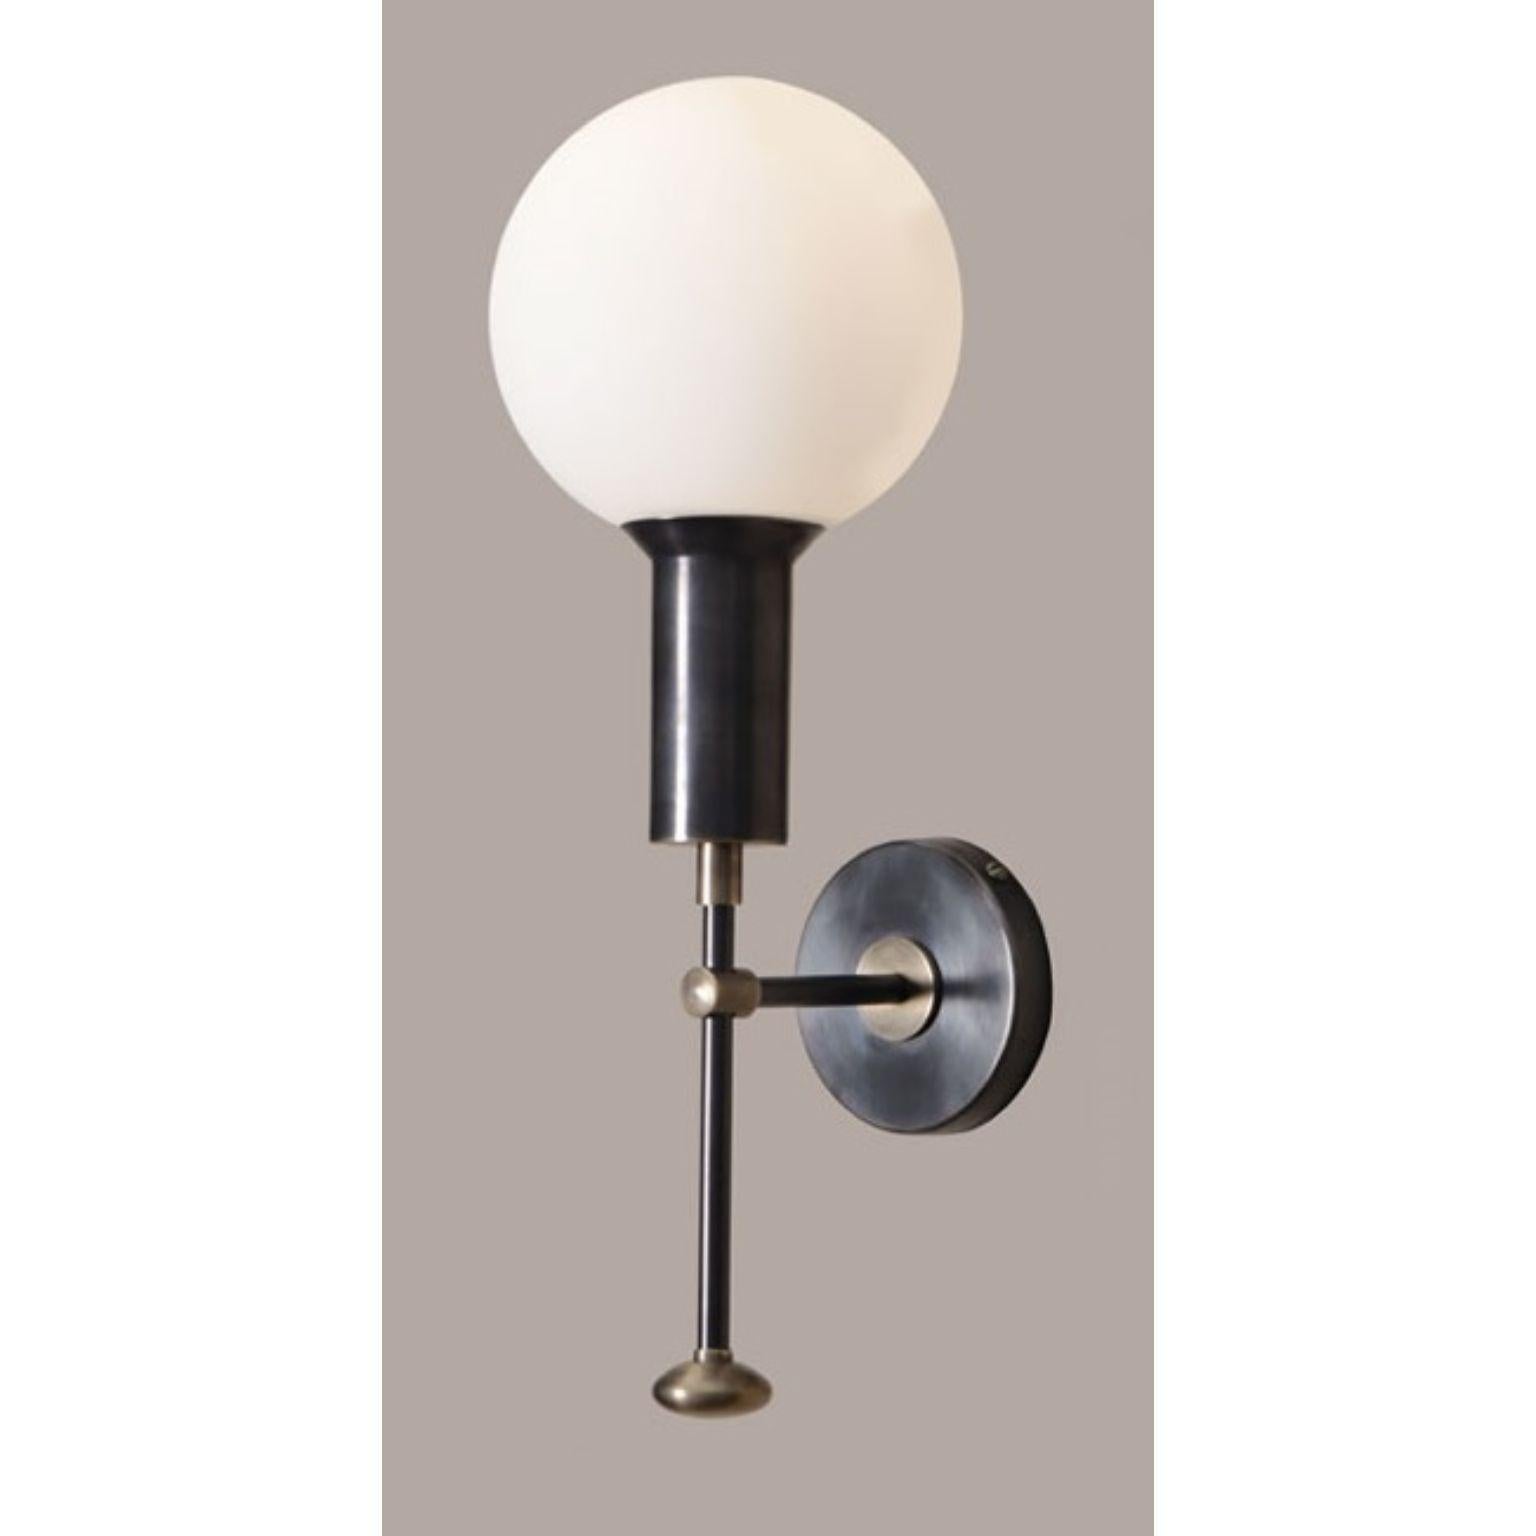 Mod Glass Globe Wall Sconce by Lamp Shaper
Dimensions: D 14 x W 18 x H 38 cm.
Materials: Brass and glass.

Different finishes available: raw brass, aged brass, burnt brass and brushed brass Please contact us.

All our lamps can be wired according to